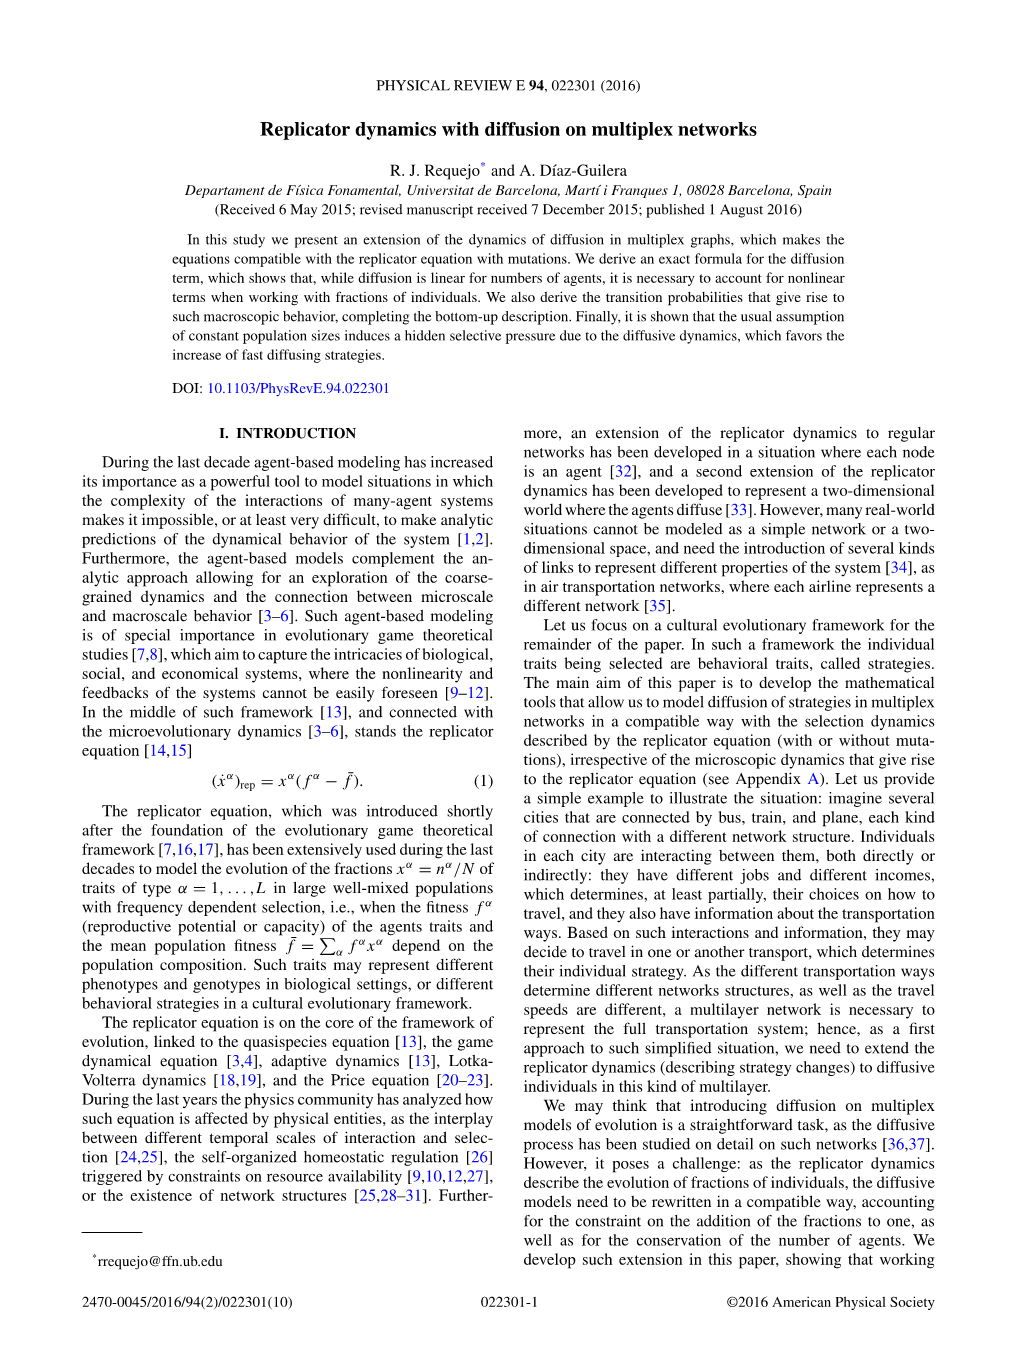 Replicator Dynamics with Diffusion on Multiplex Networks